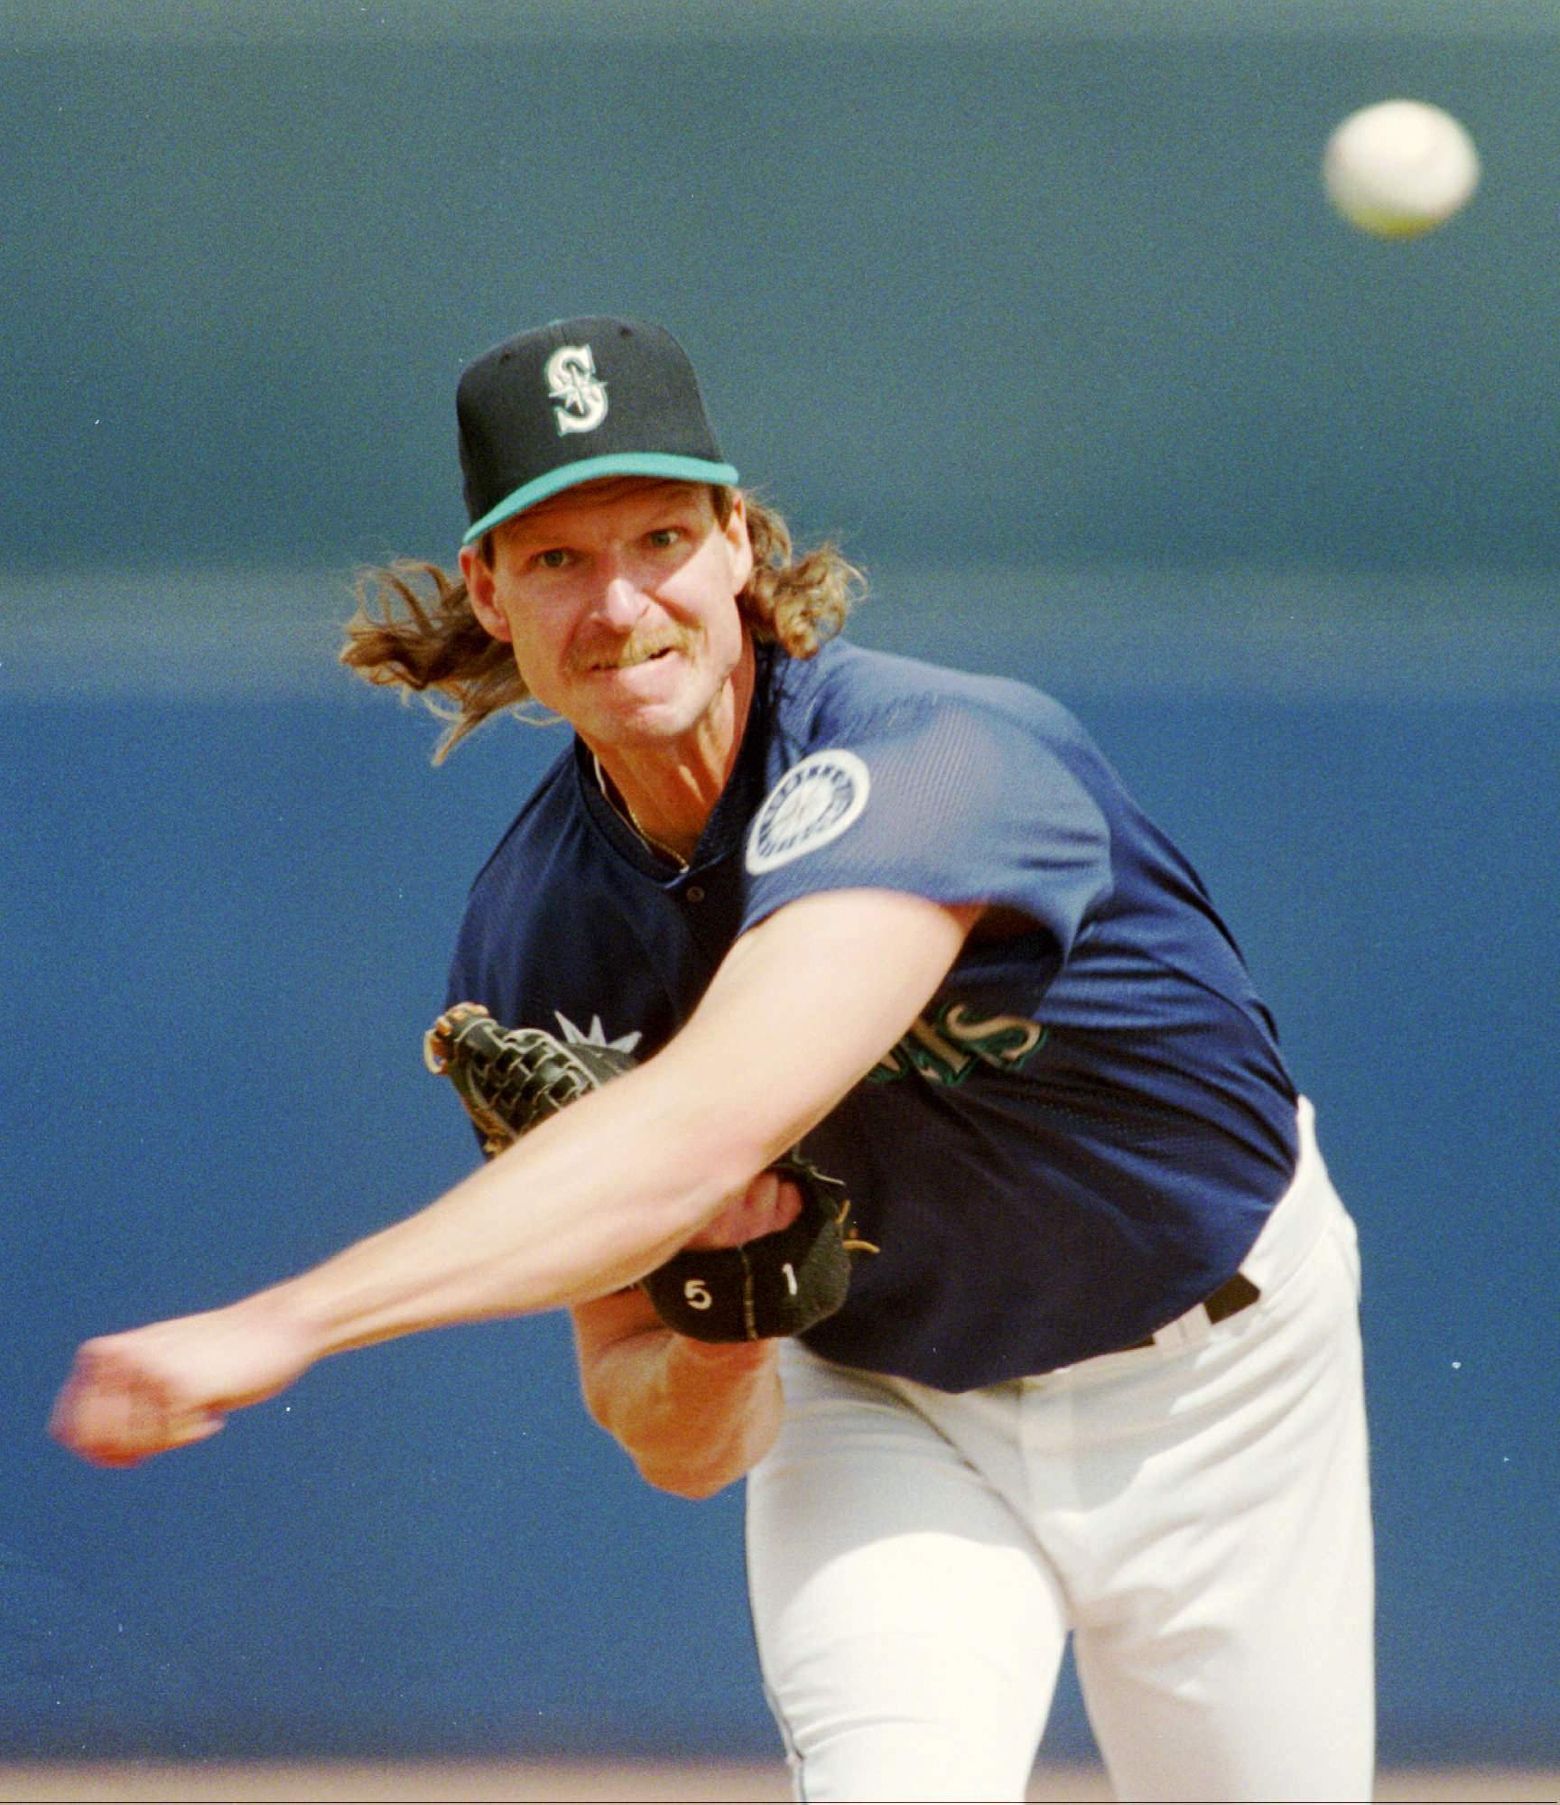 Though he'll enter Hall of Fame as a D-Back, Randy Johnson cherishes time  with Mariners